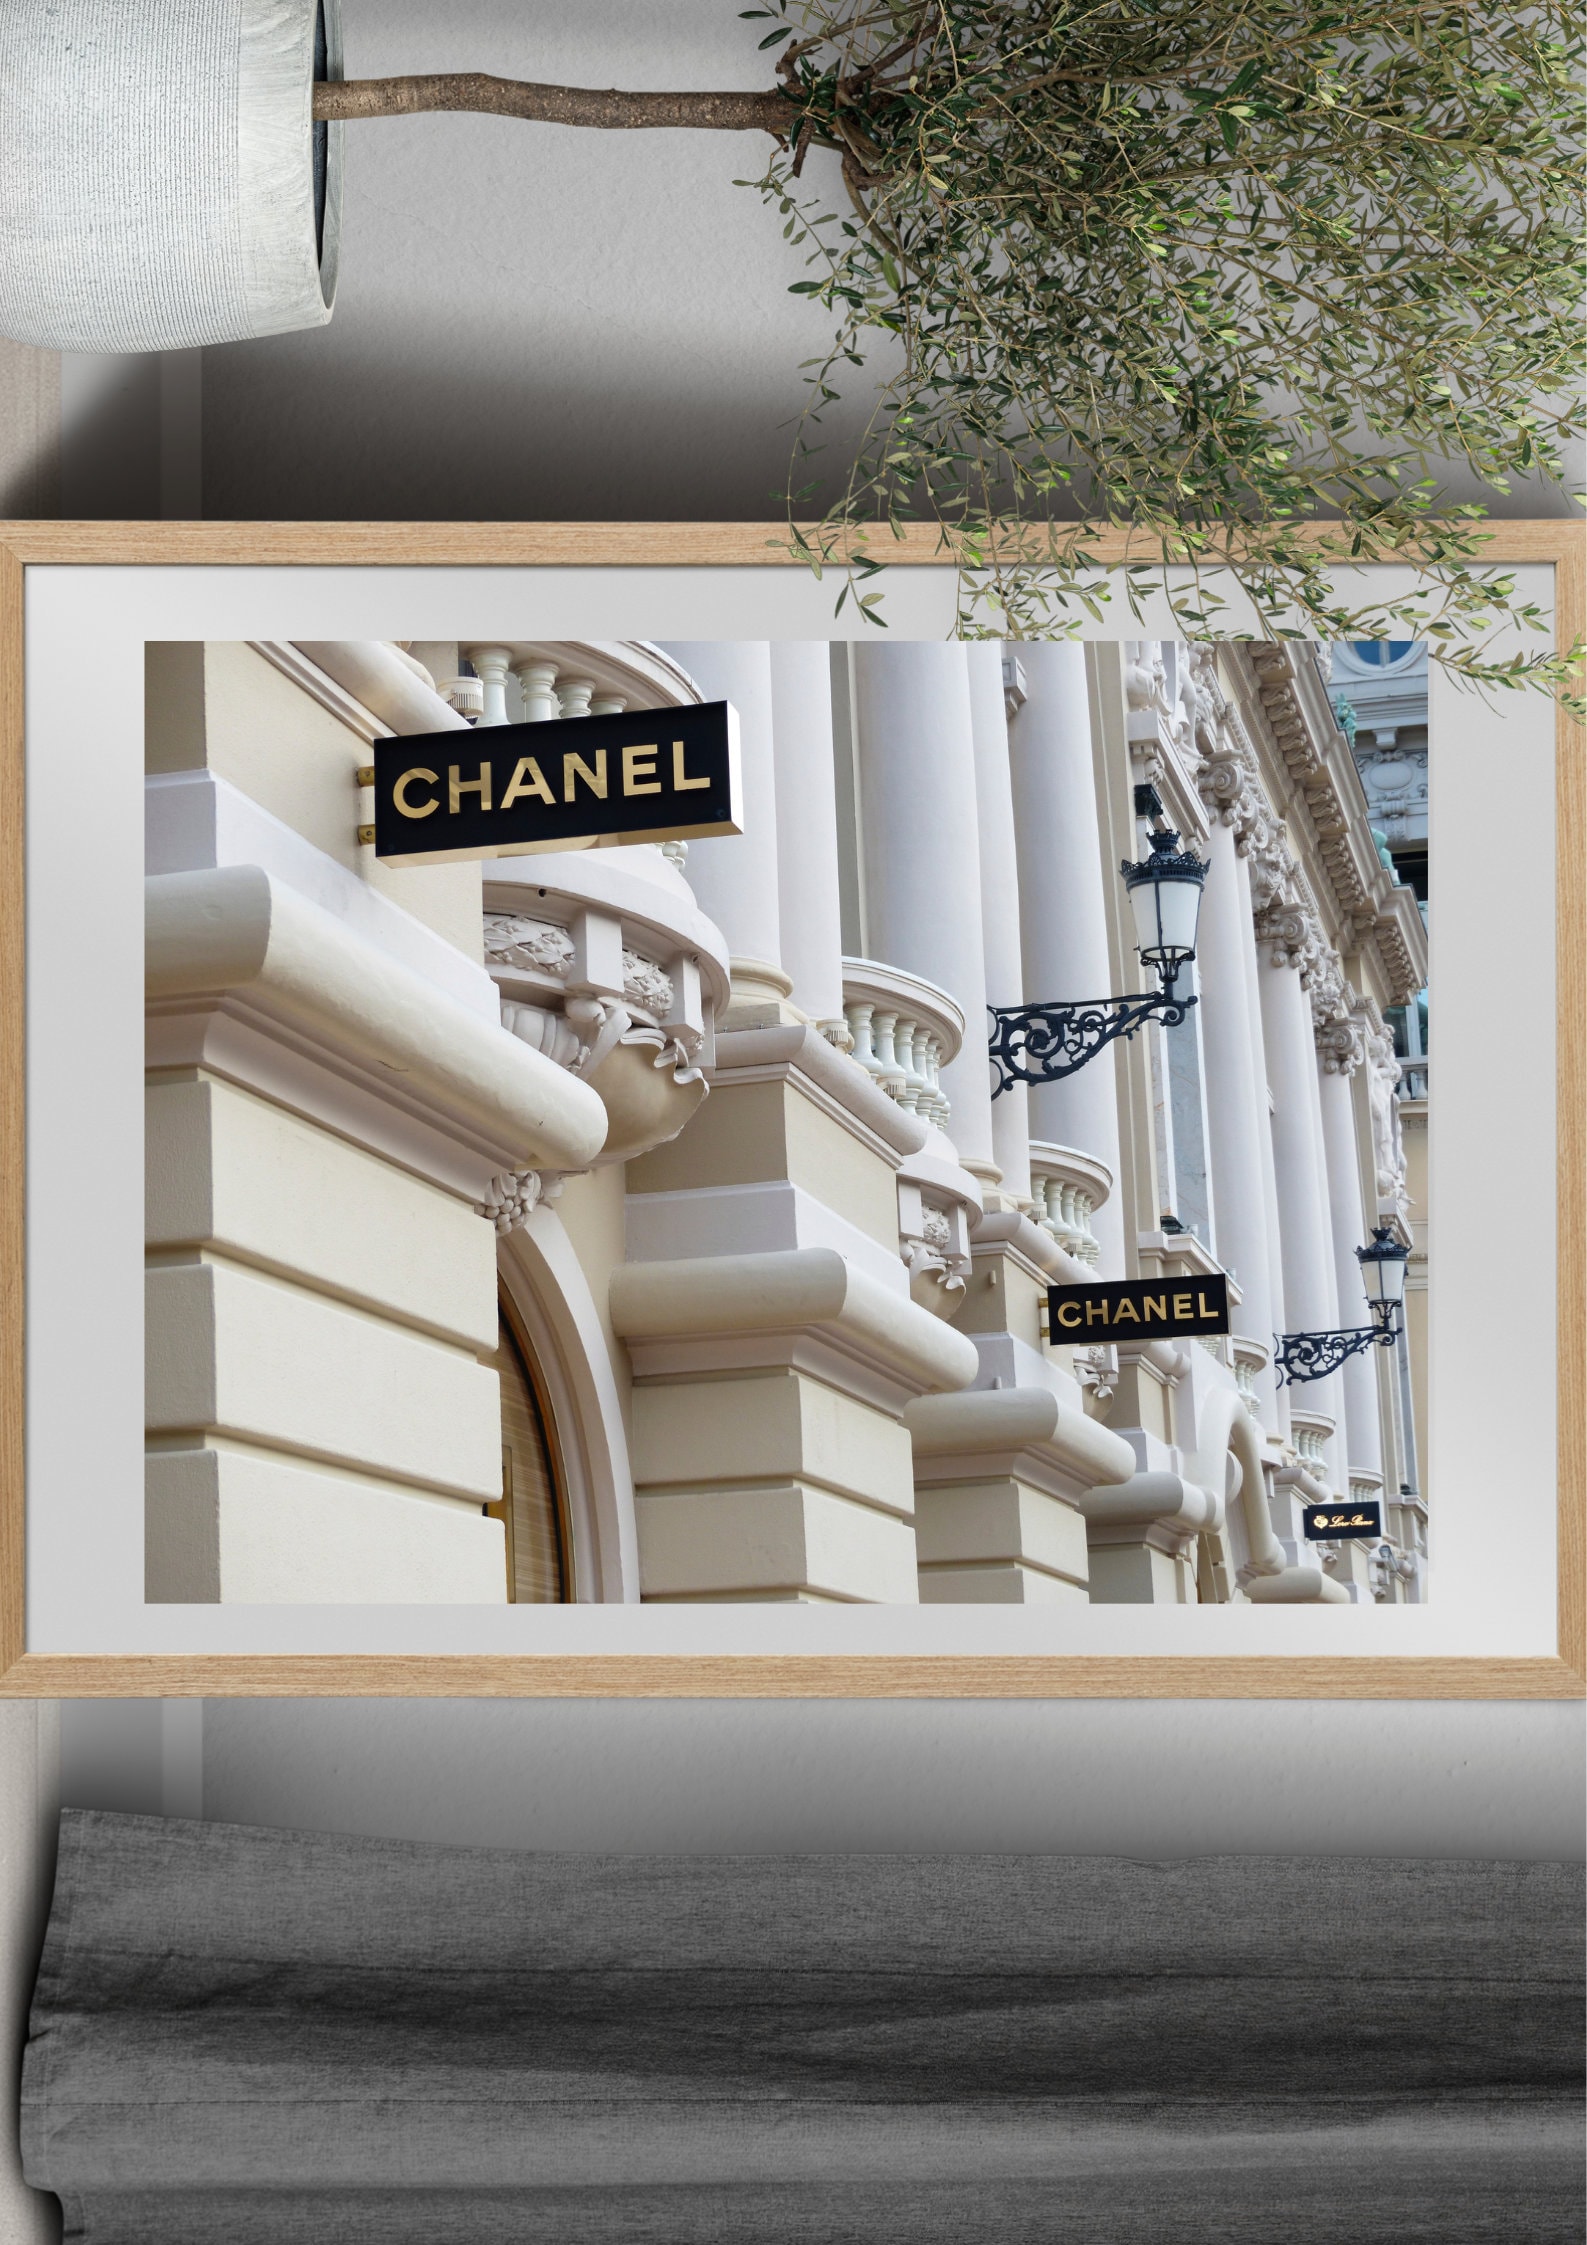 Digital & Printable Chanel Shop Sign Poster High Definition file for  printing Instant Digital Access and Download JPEG 3500 x 2625 px 300dpi